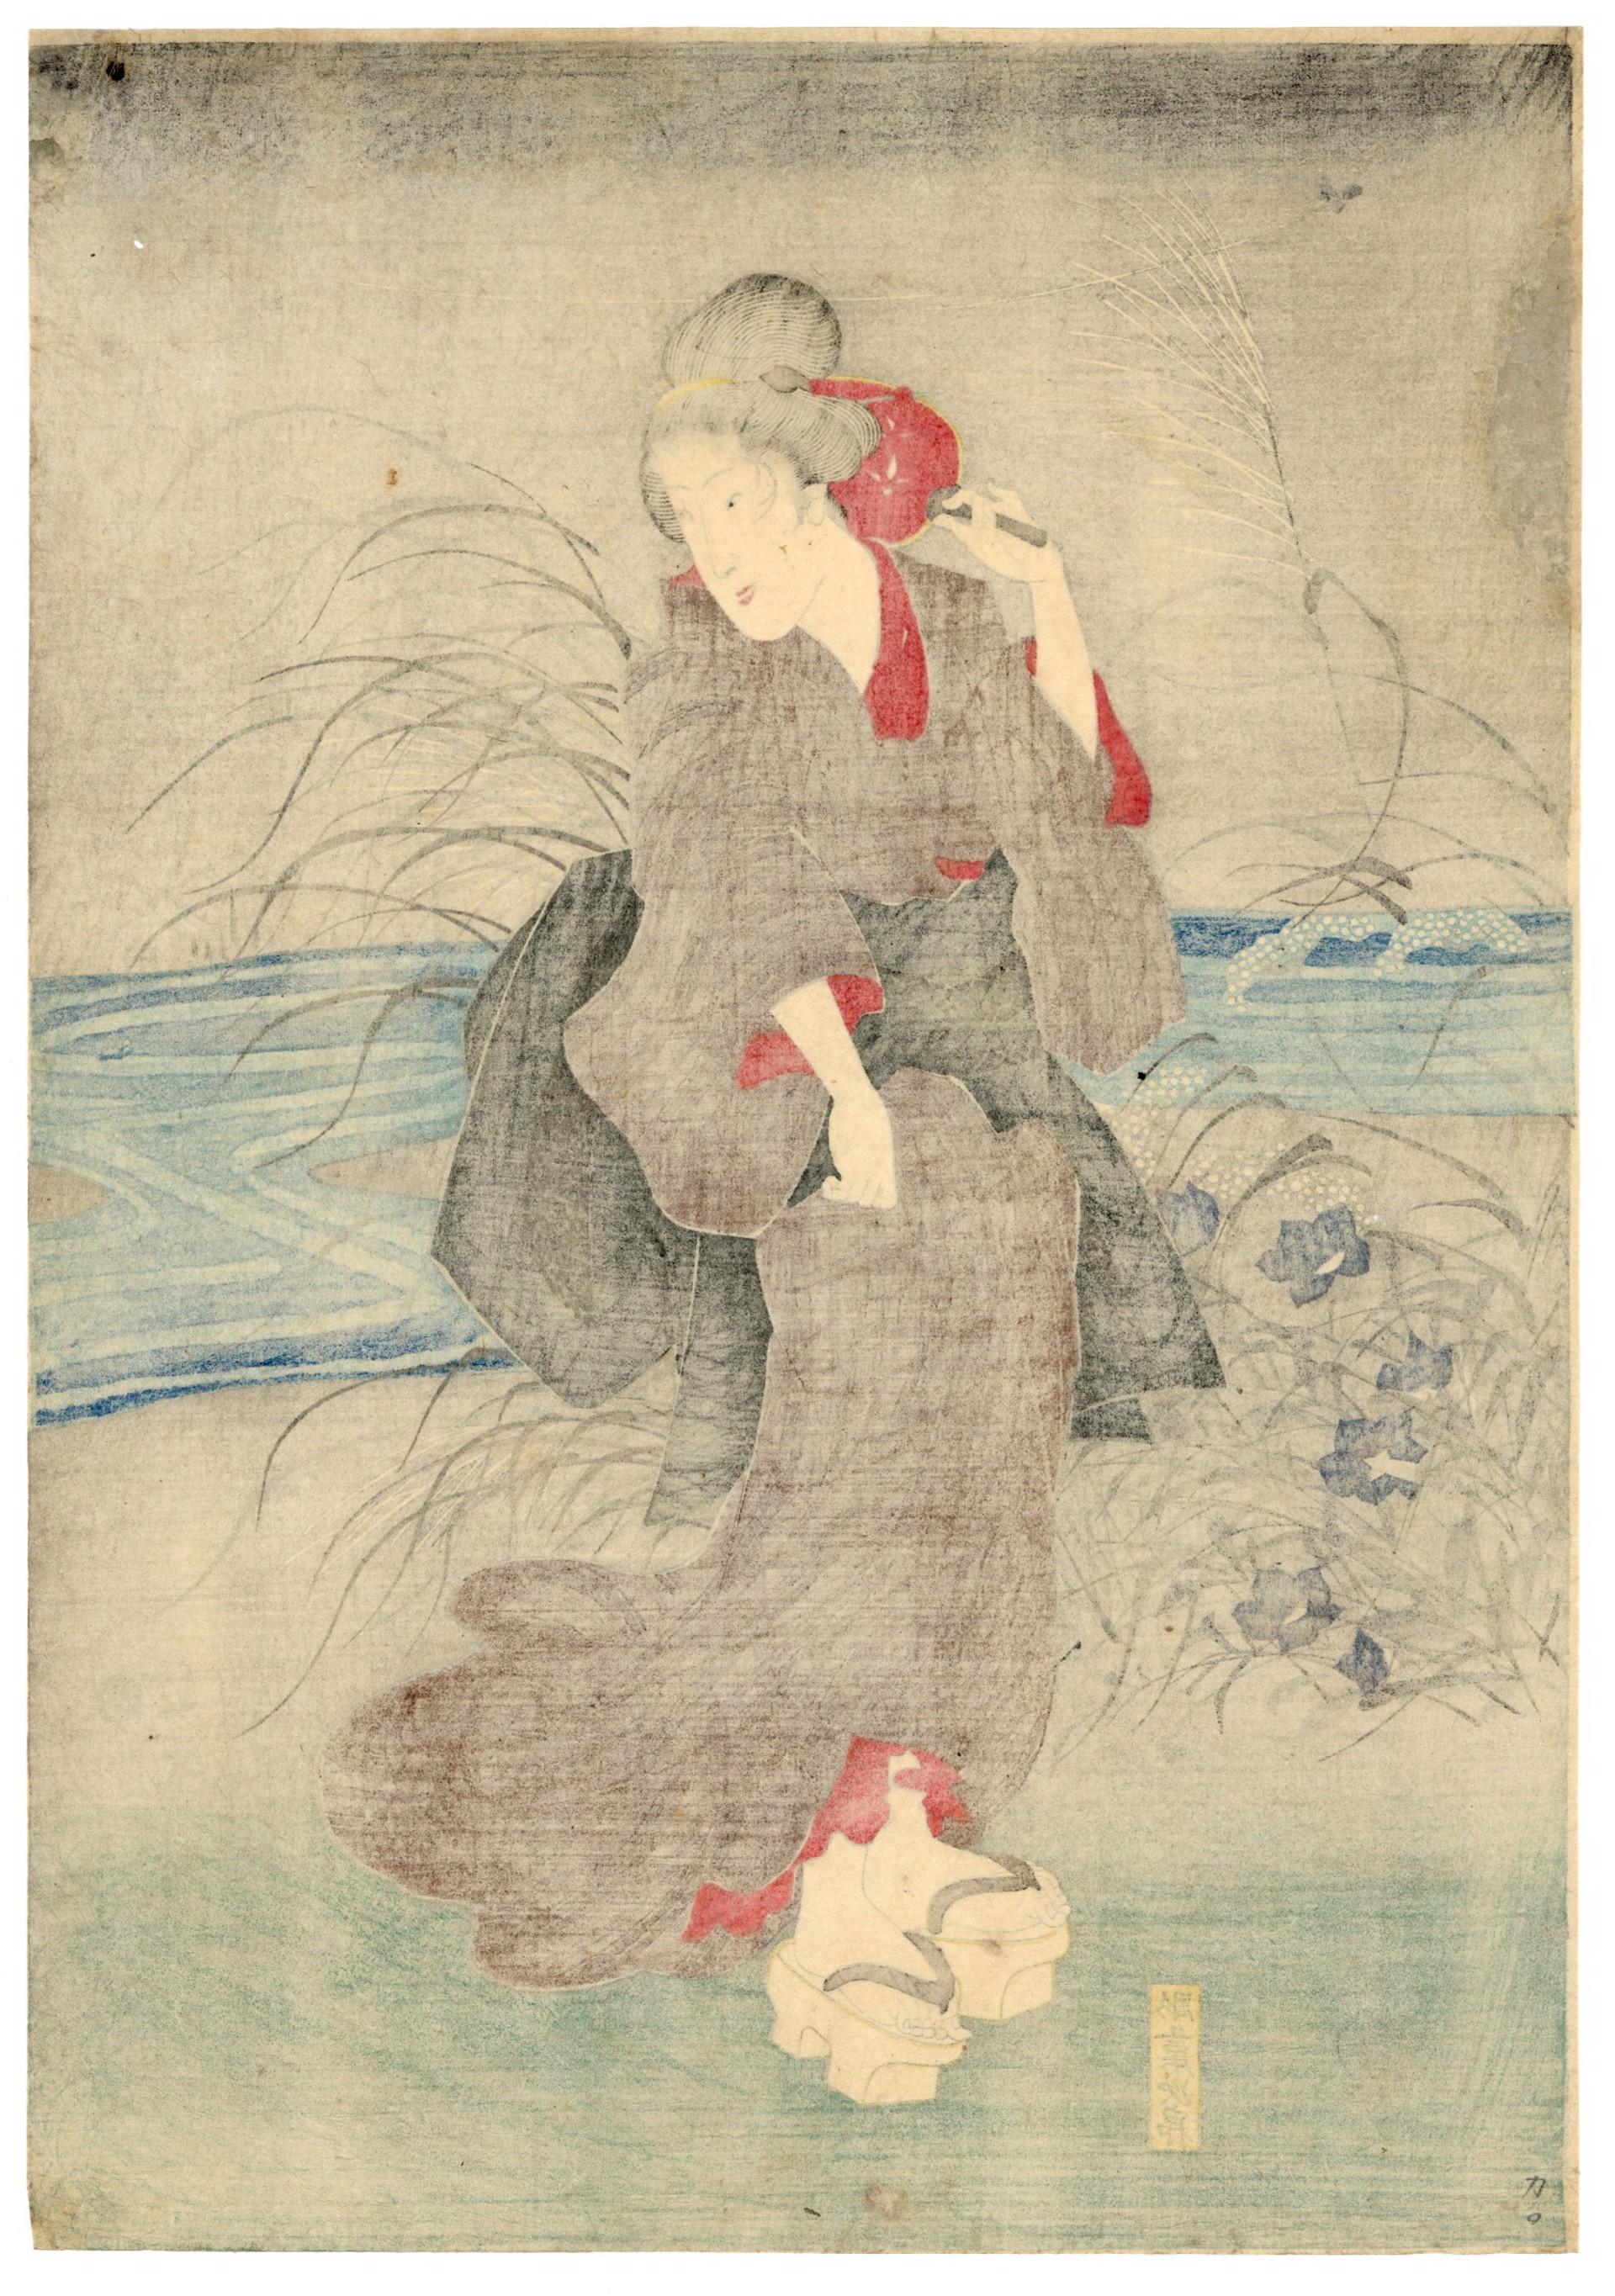 Autumn: Catching Fireflies in the Cool of the Evening by Kuniyoshi